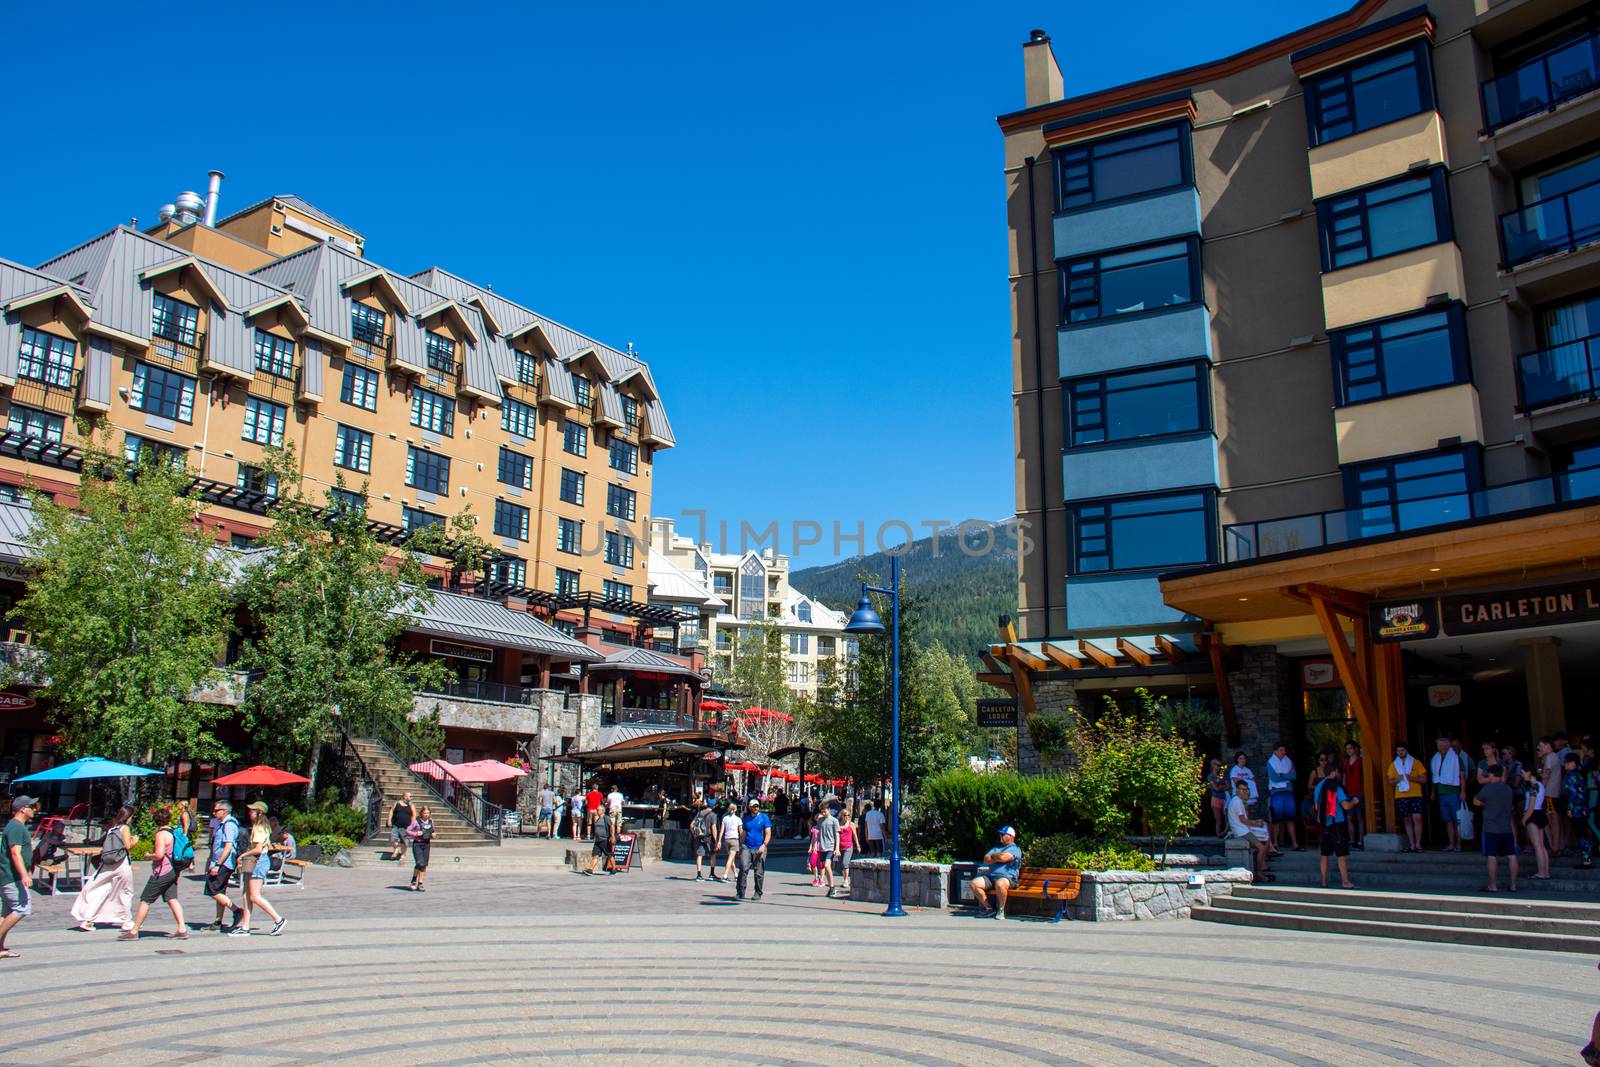 "Whistler, British Columbia/Canada - 08/07/2019: Carleton Lodge in Whistler village outside streets during the summer looking at the walkway, street, shops, hotels, and tourists enjoying this Olympic world class destination."